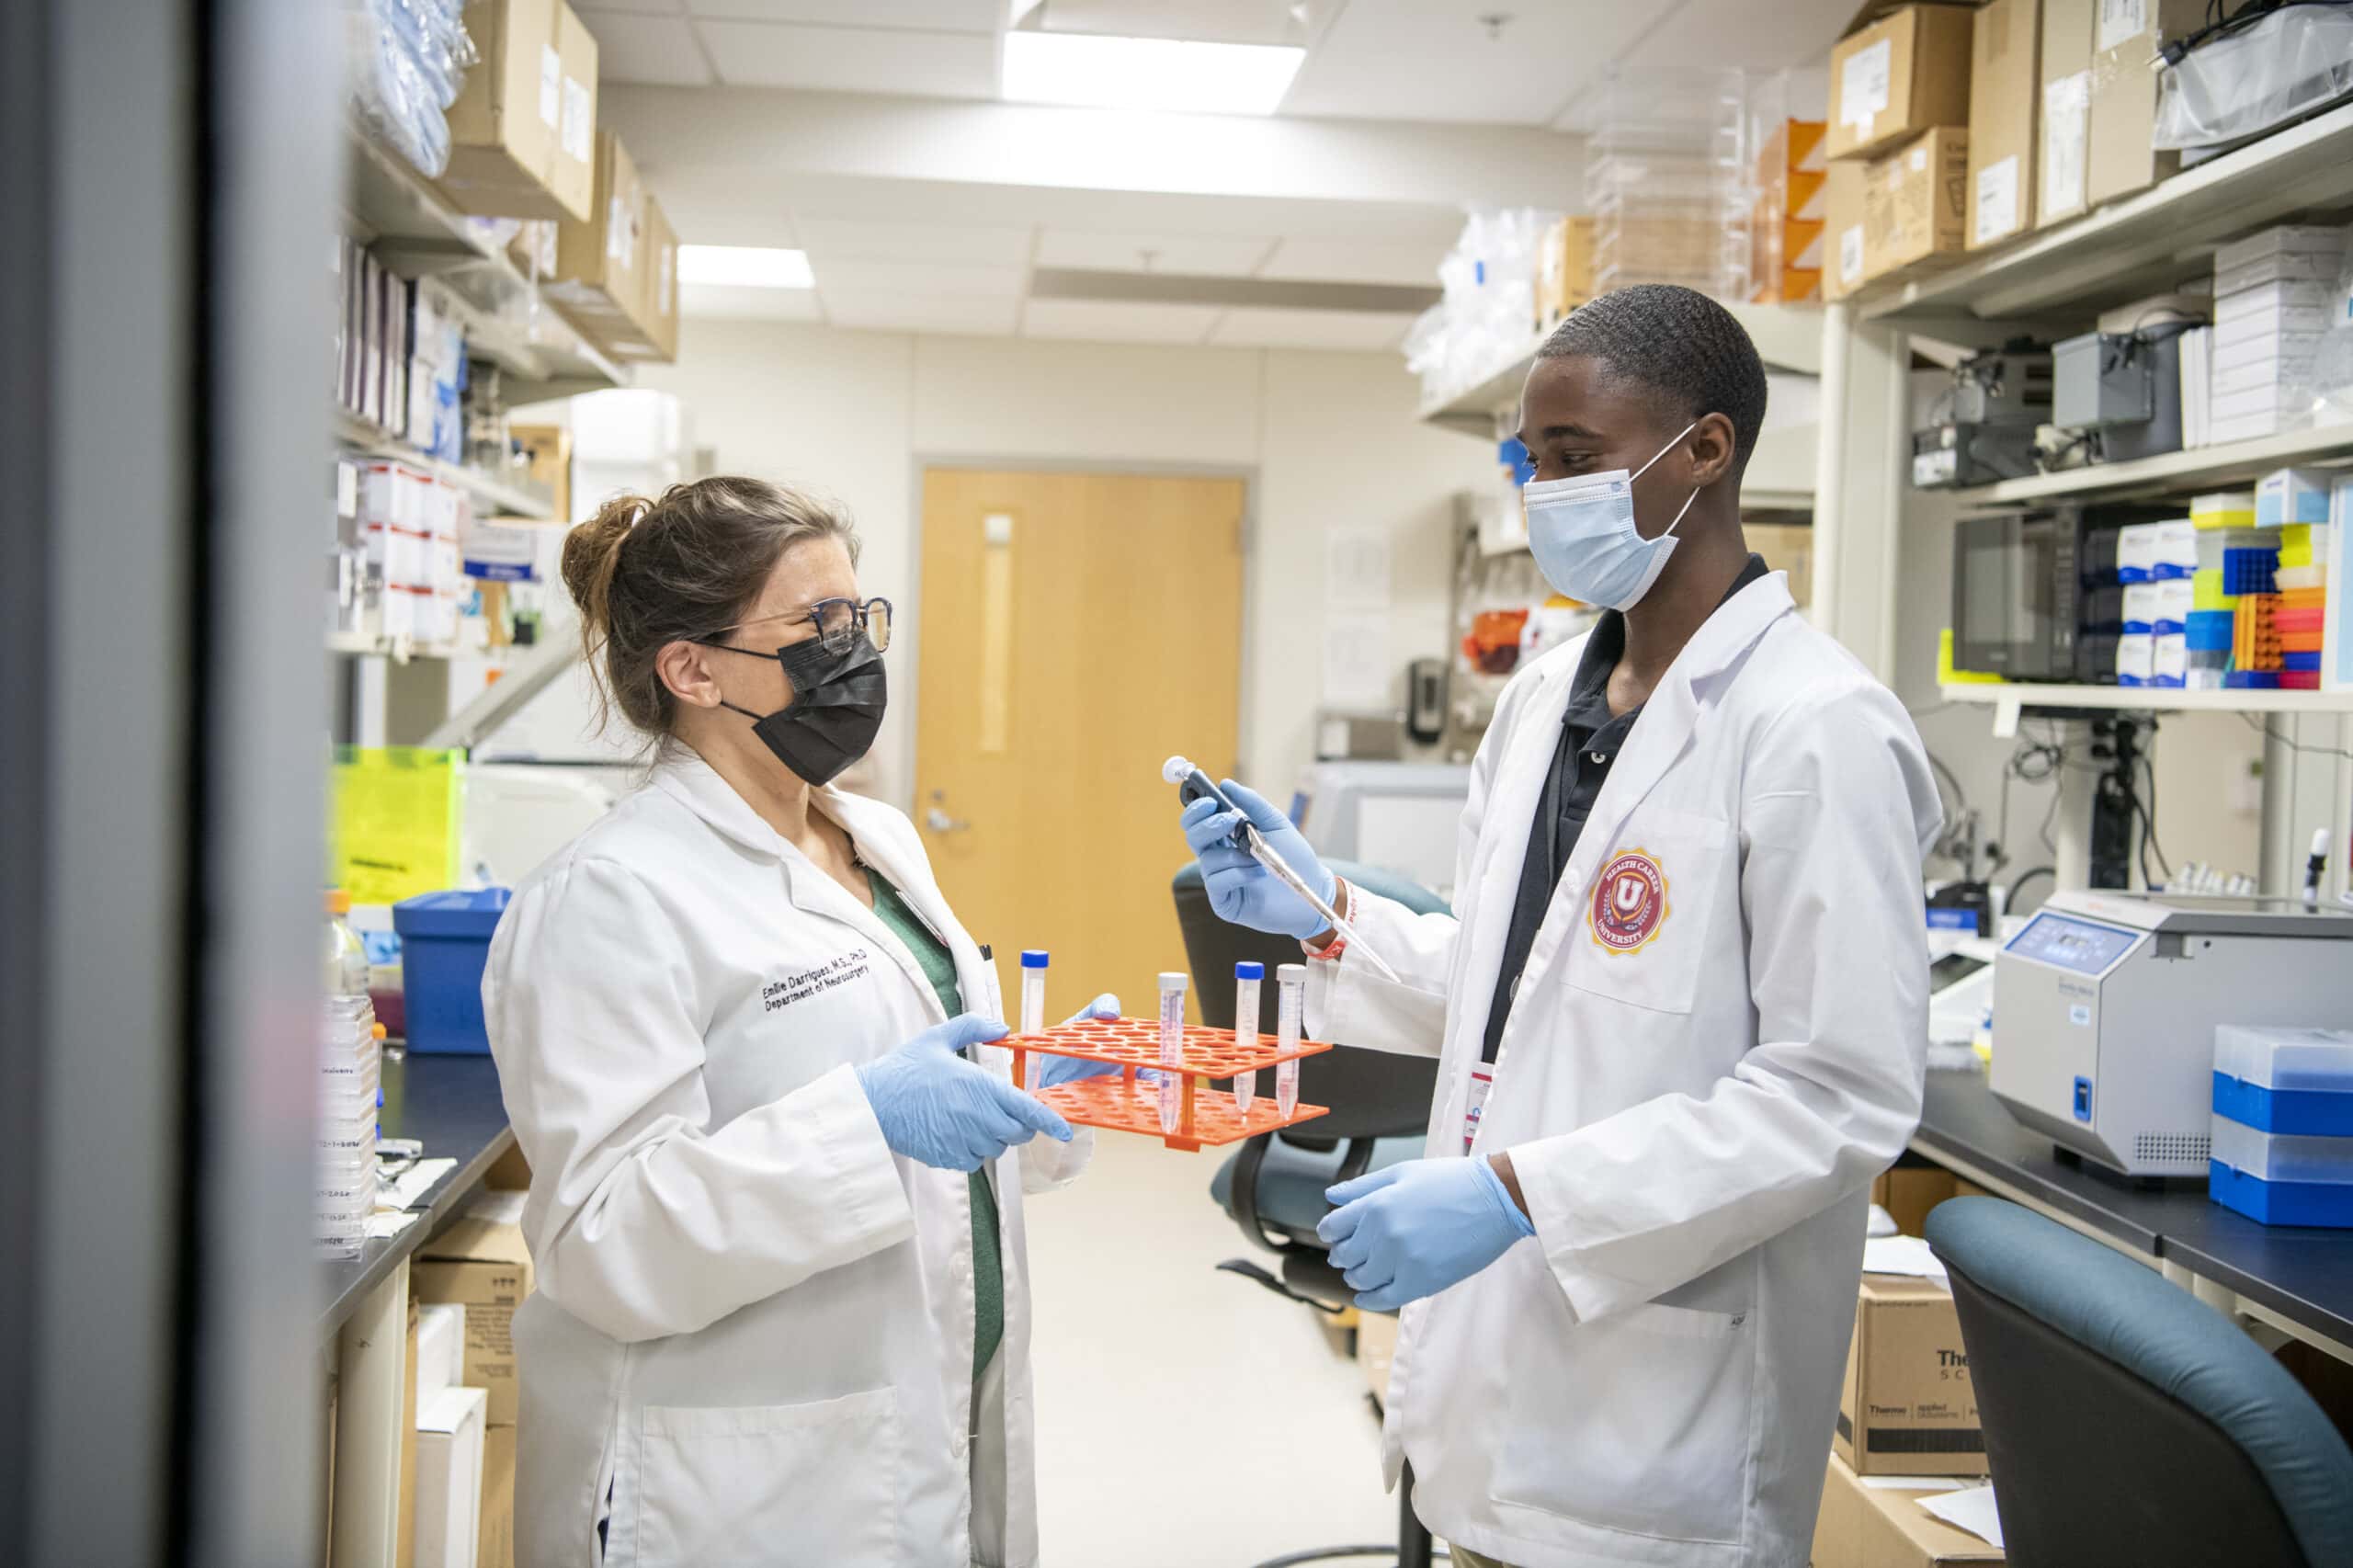 Many of the programs in Health Career U provide students with the opportunity to get hands-on experience in a research lab.